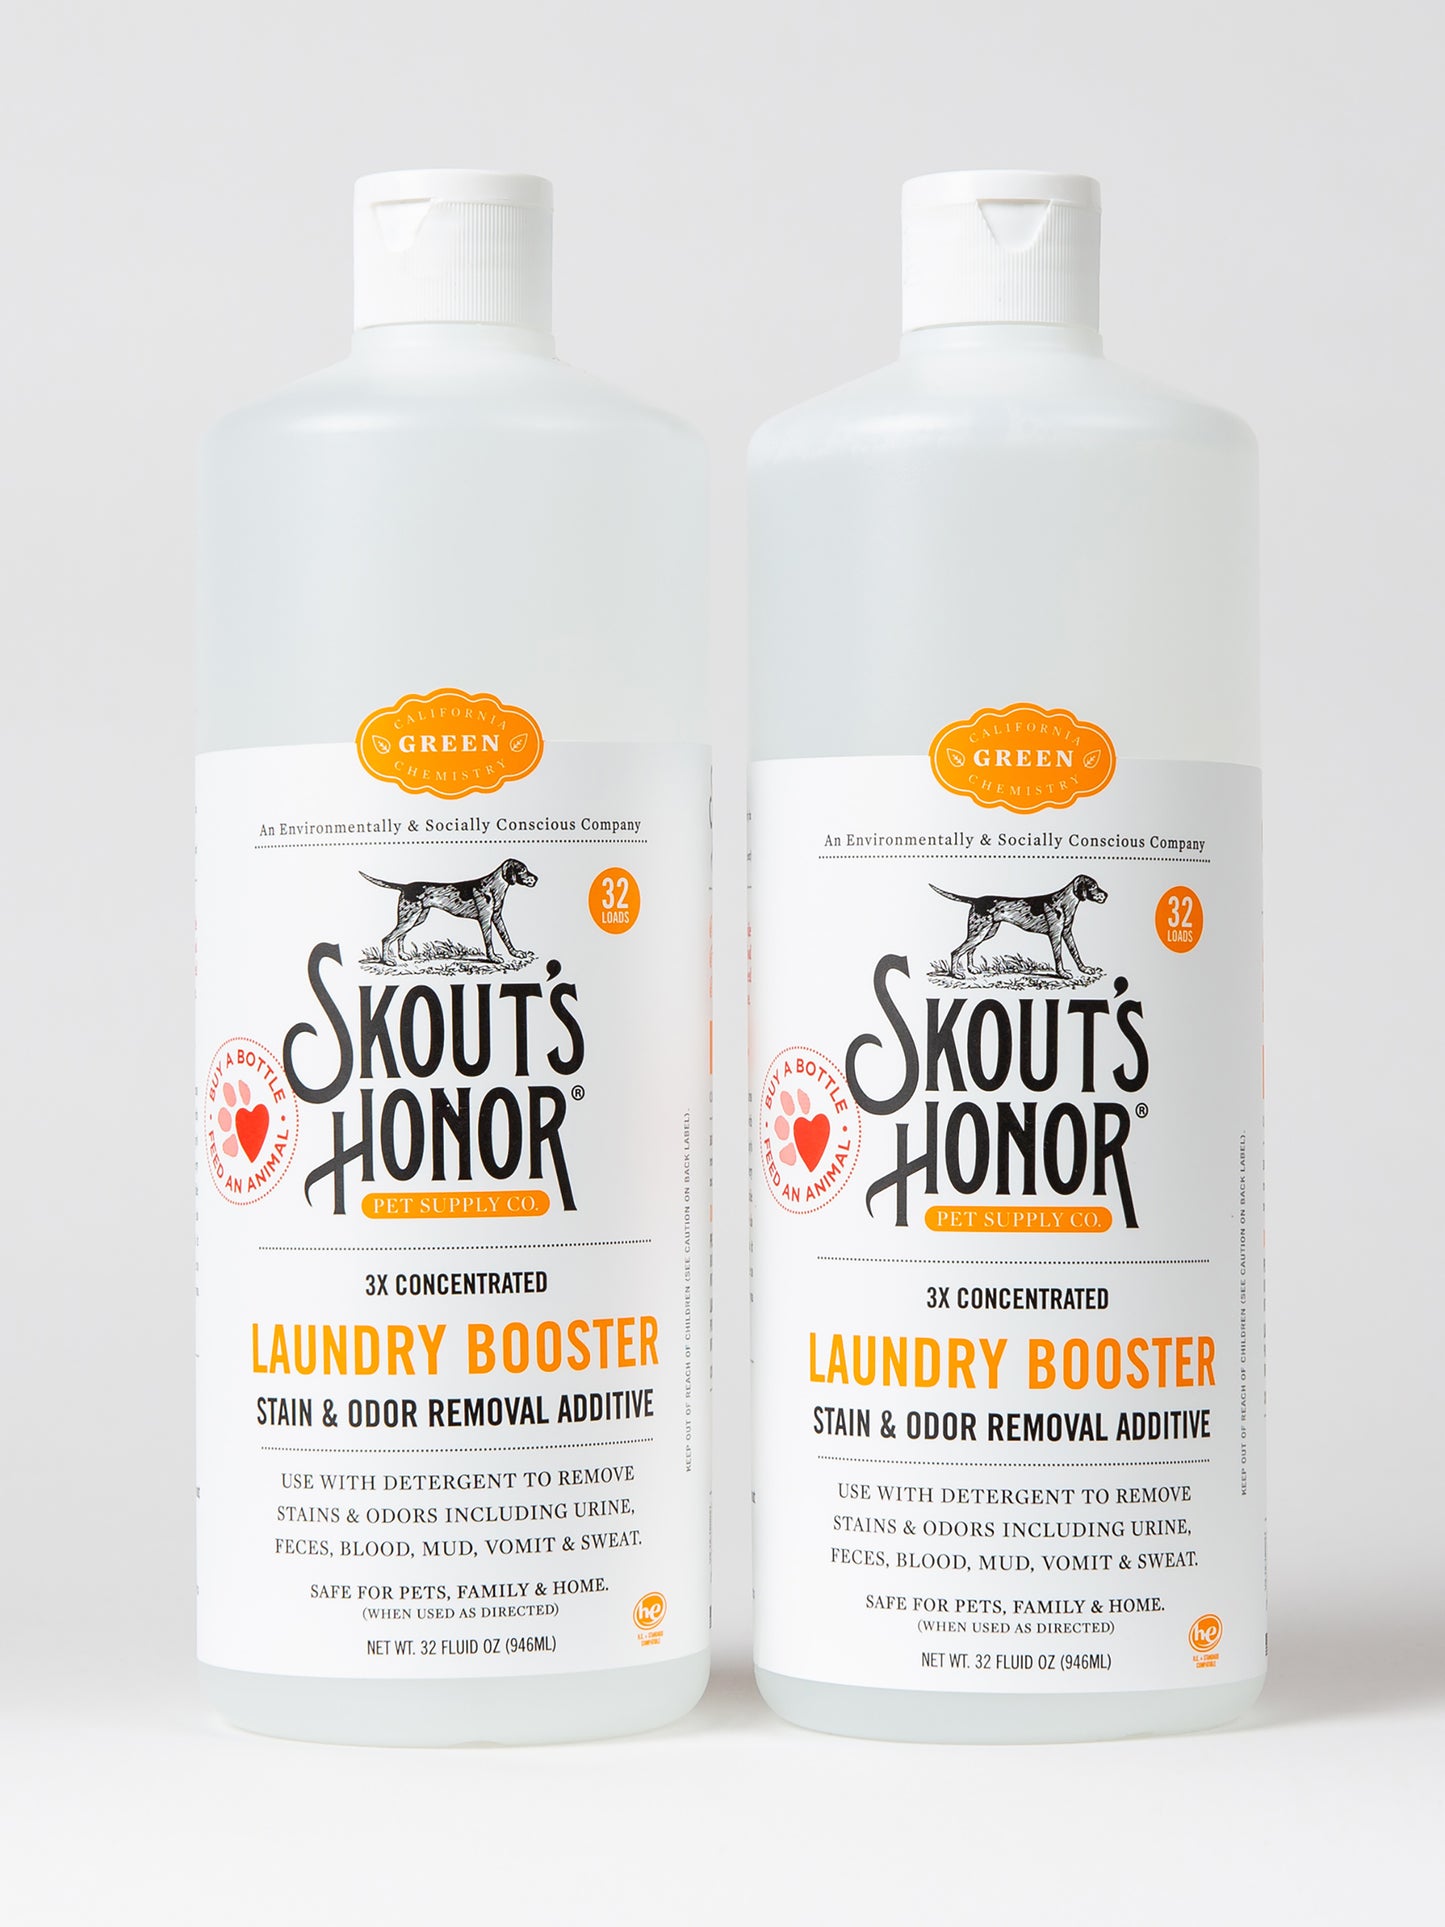 Laundry Booster - Stain & Odor Removal Additive